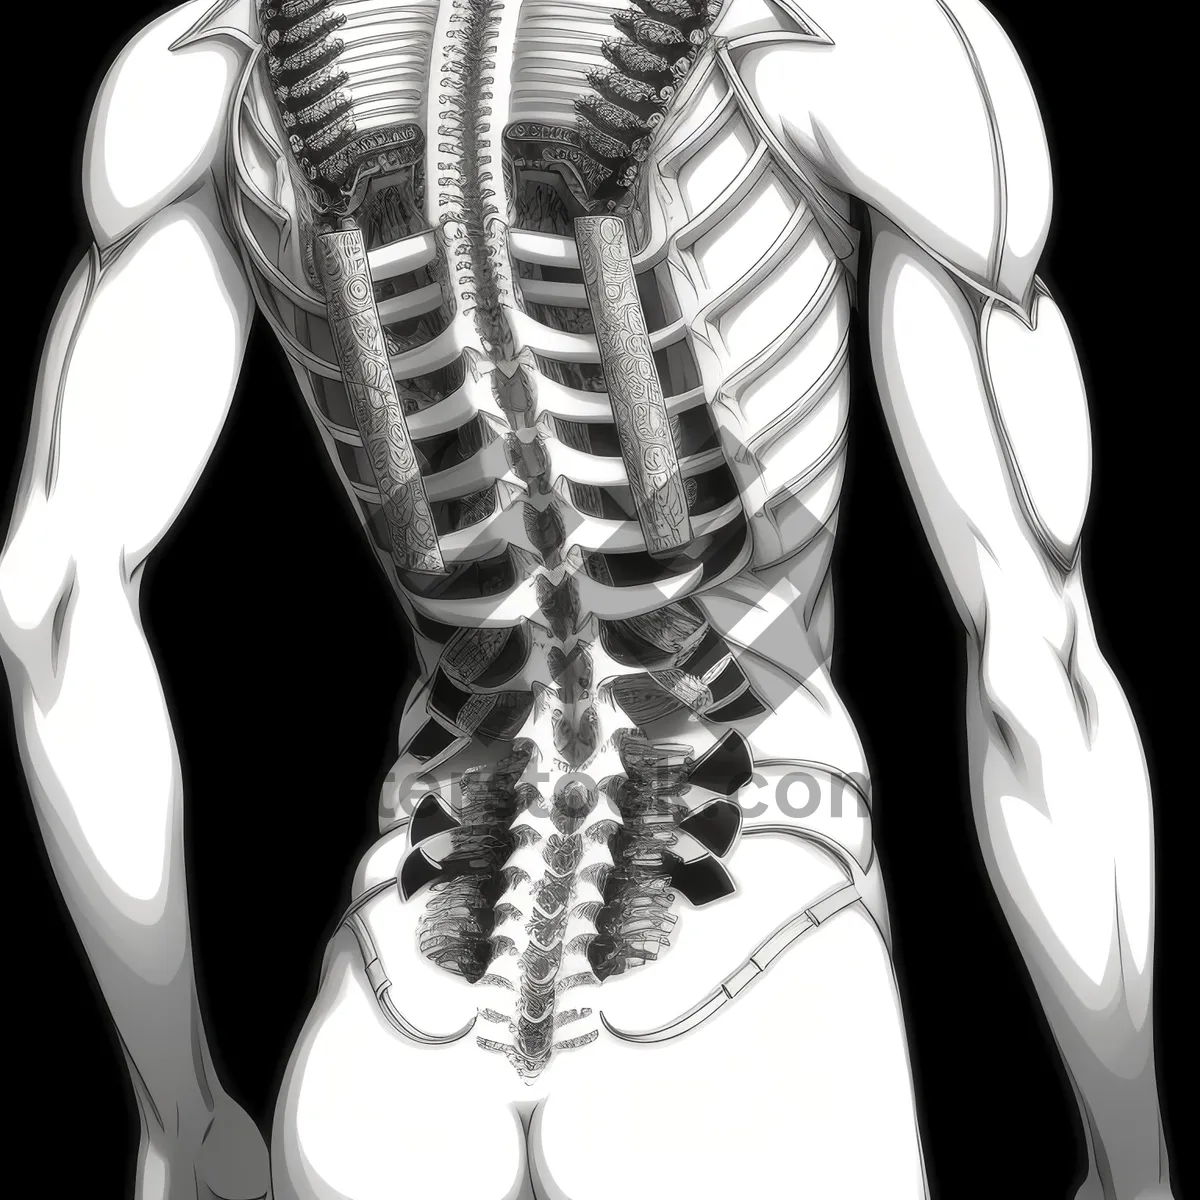 Picture of Medical Skeleton X-Ray Anatomy - Detailed Human Spine